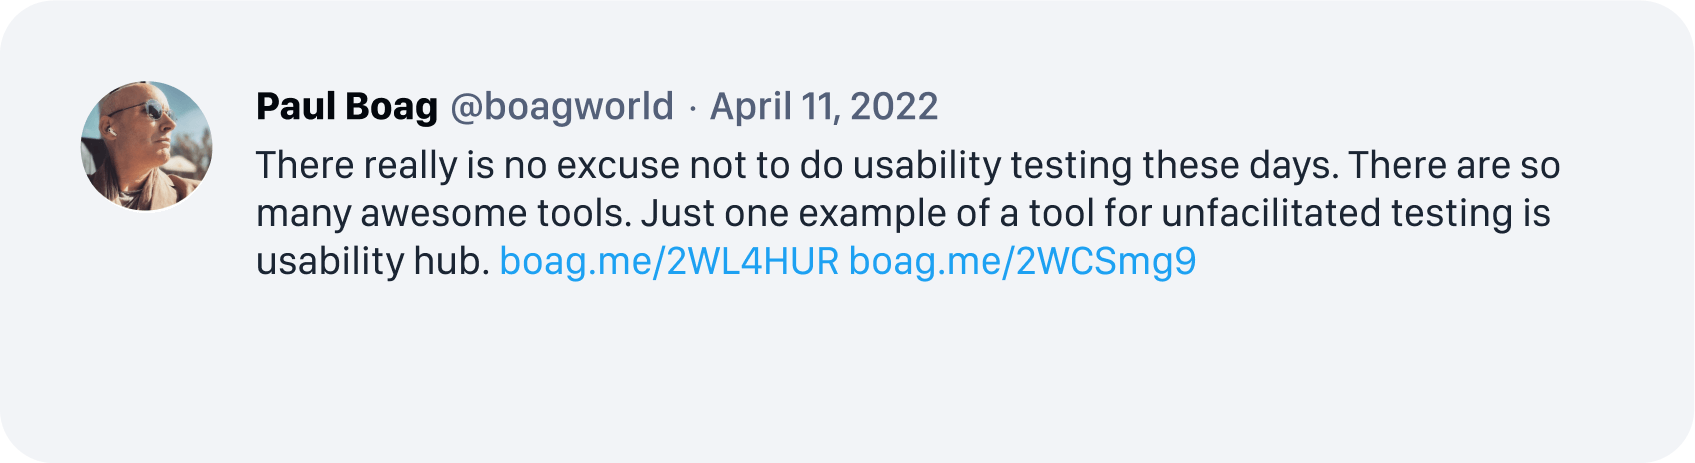 Paul Boag, @boagworld - There really is no excuse not to do usability testing these days. There are so many awesome tools. Just one example of a tool for unfacilitated testing is usability hub.